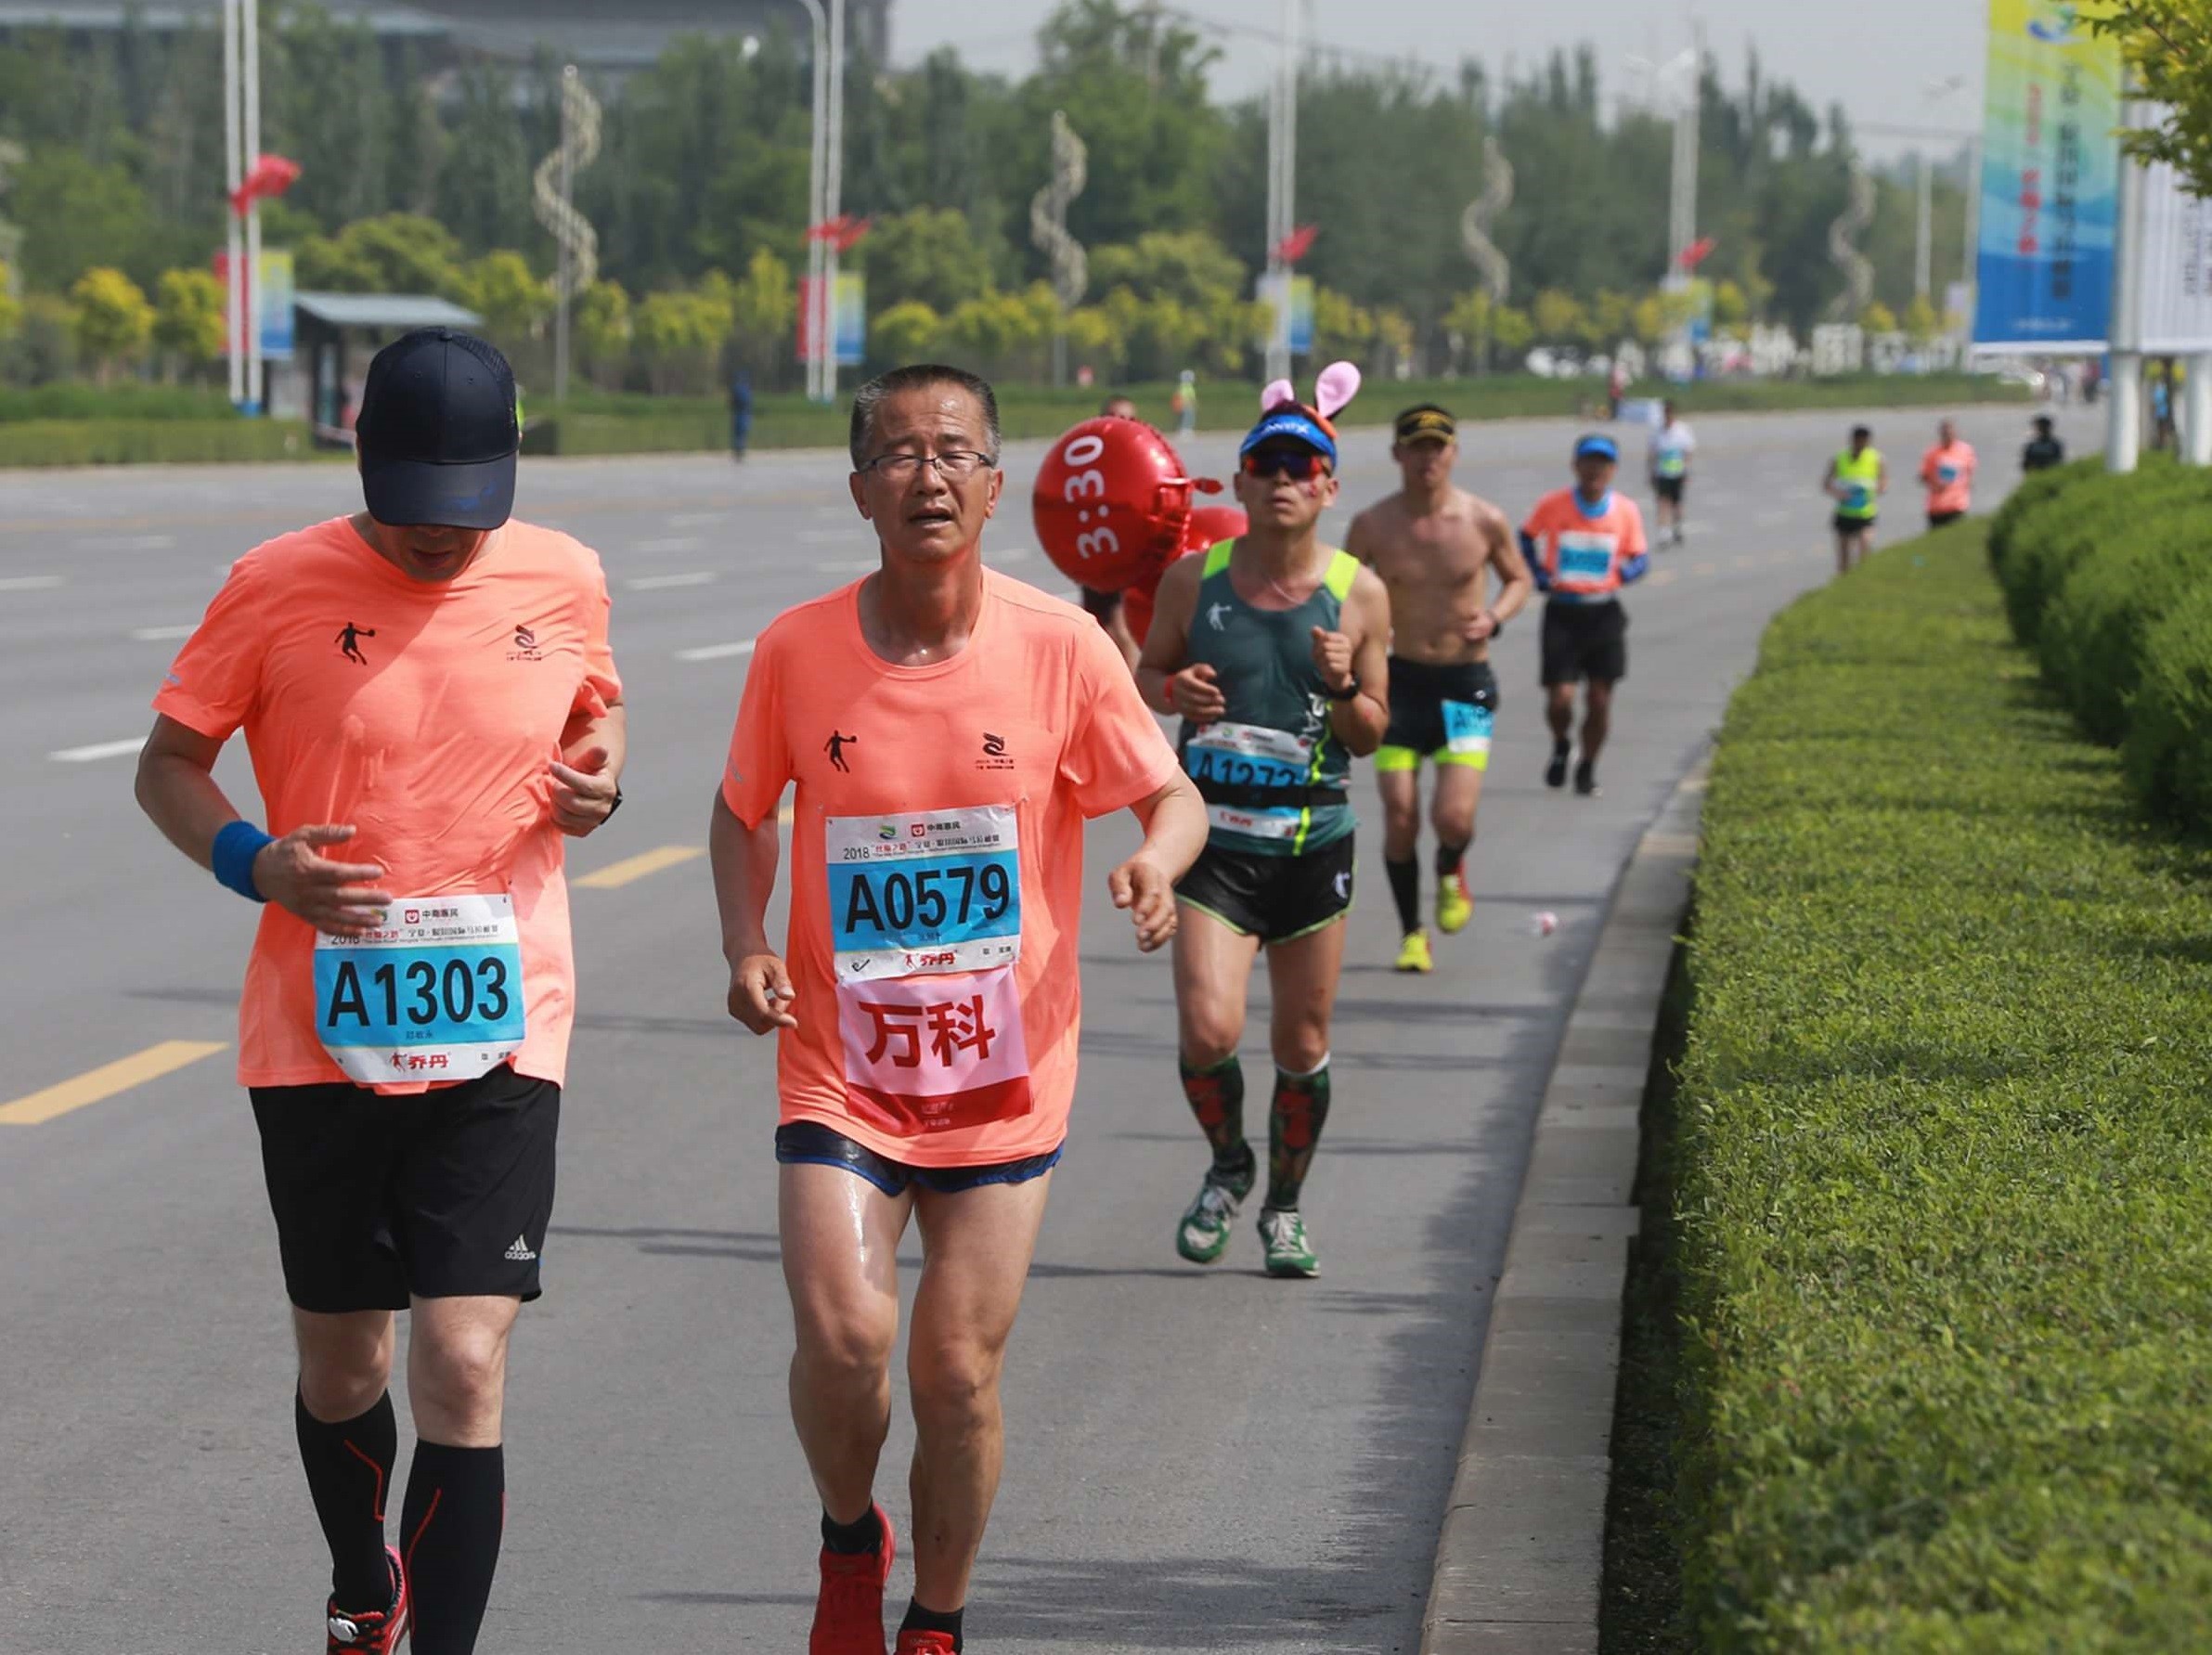 74-year-old Gu Dawo is the the oldest official pacemaker in Chinese marathon history